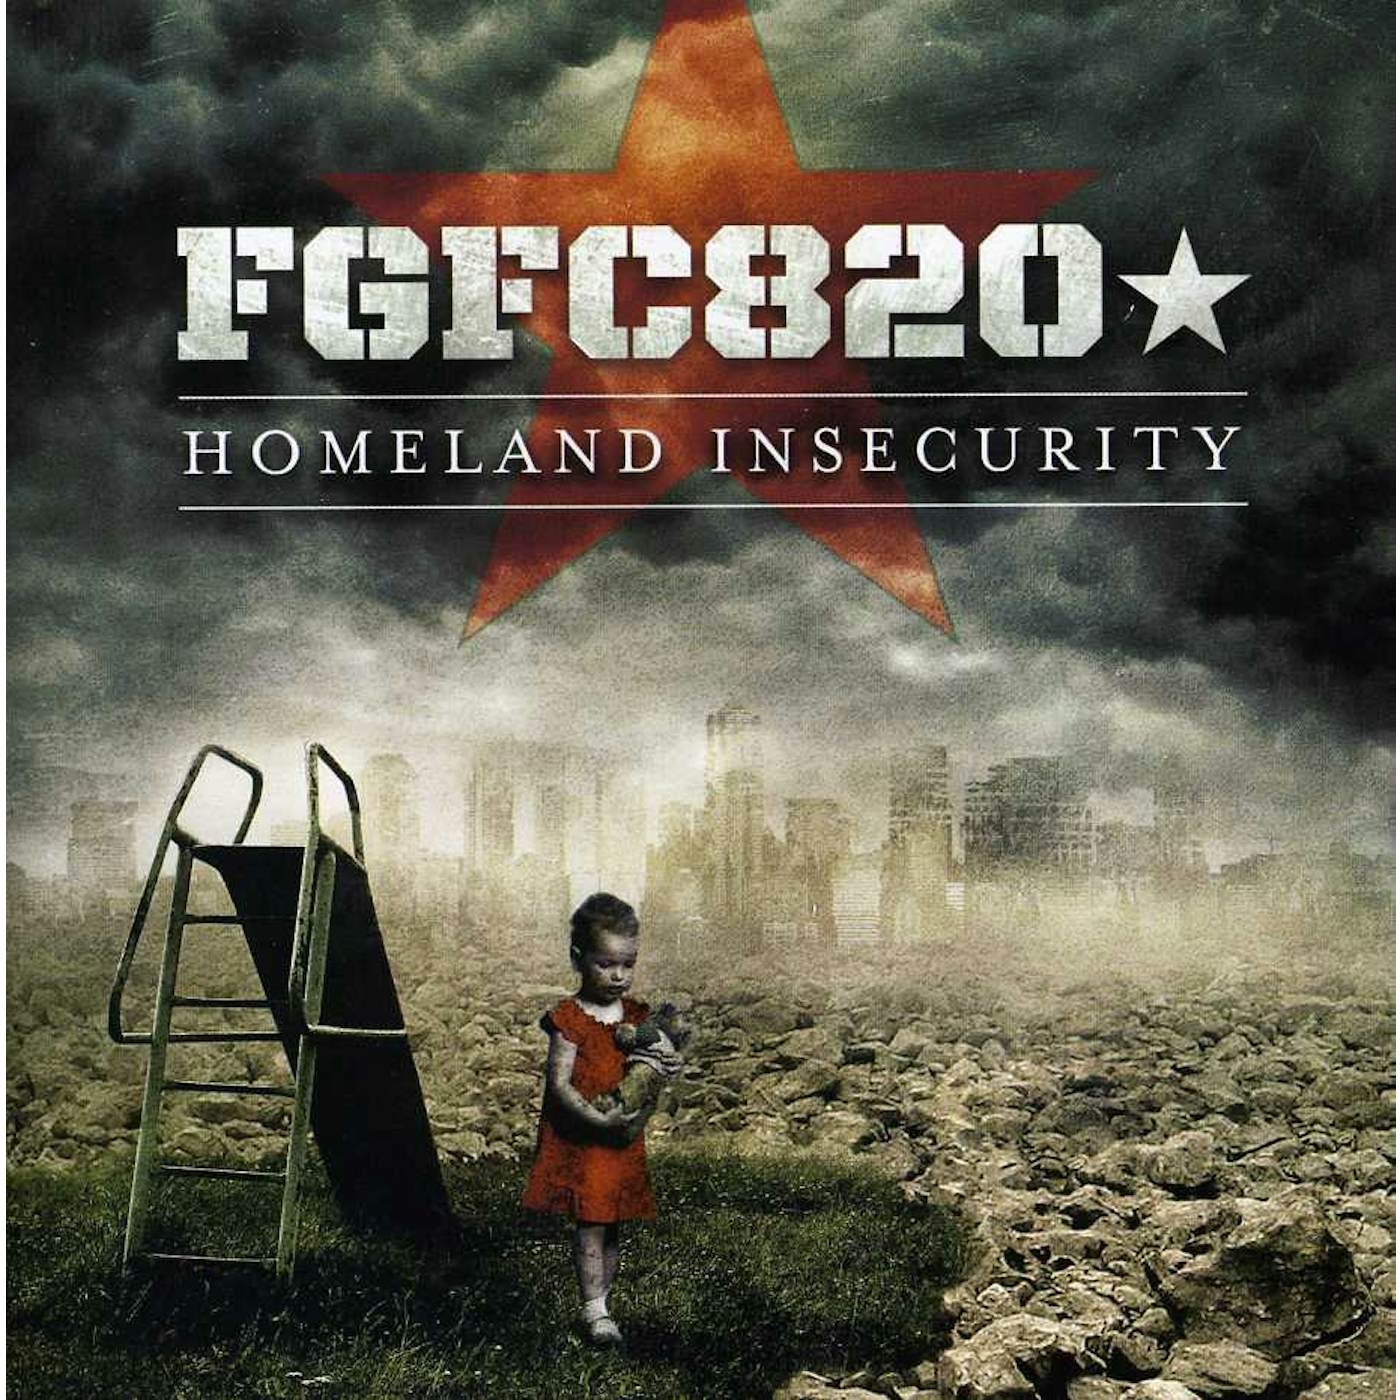 FGFC820 HOMELAND INSECURITY CD